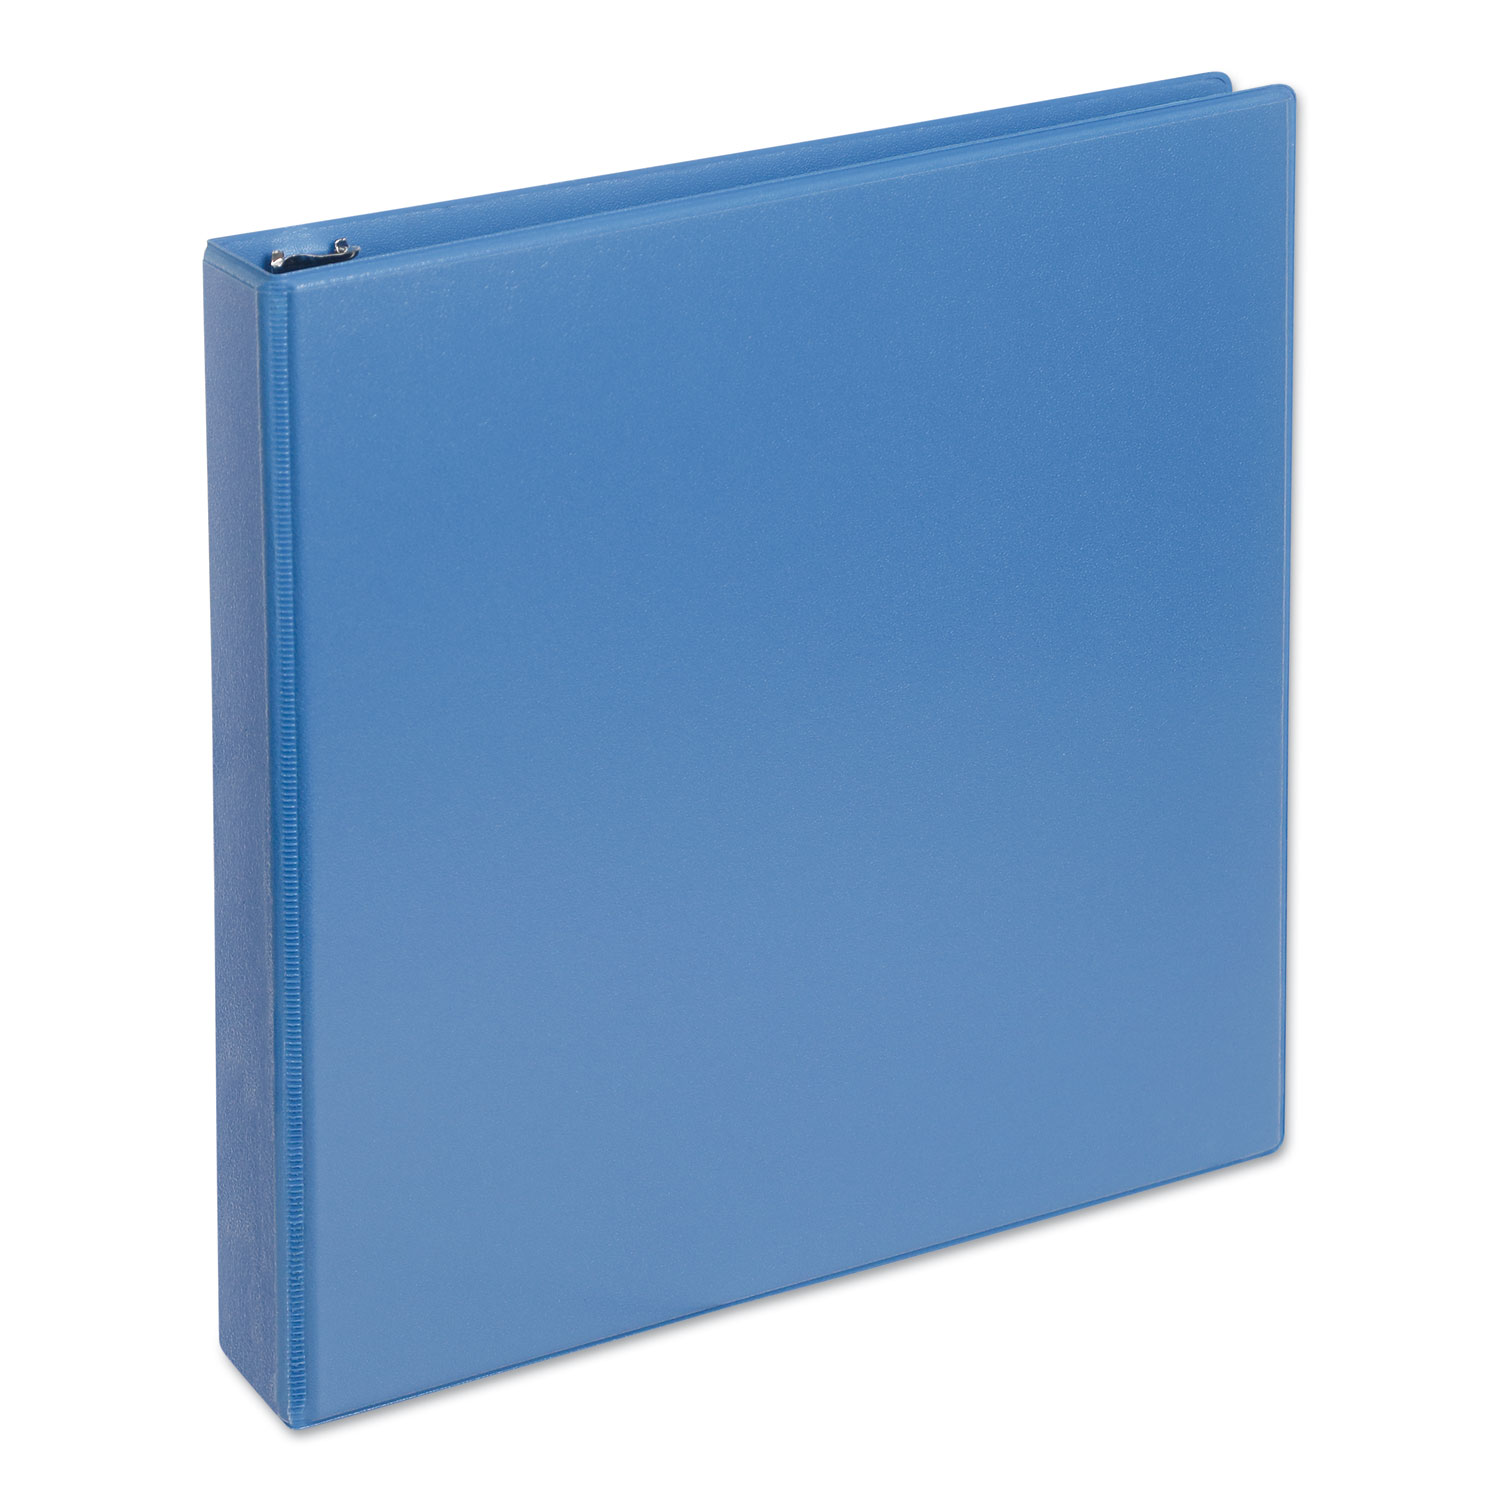  Universal UNV20723 Deluxe Round Ring View Binder, 3 Rings, 1.5 Capacity, 11 x 8.5, Light Blue (UNV20723) 